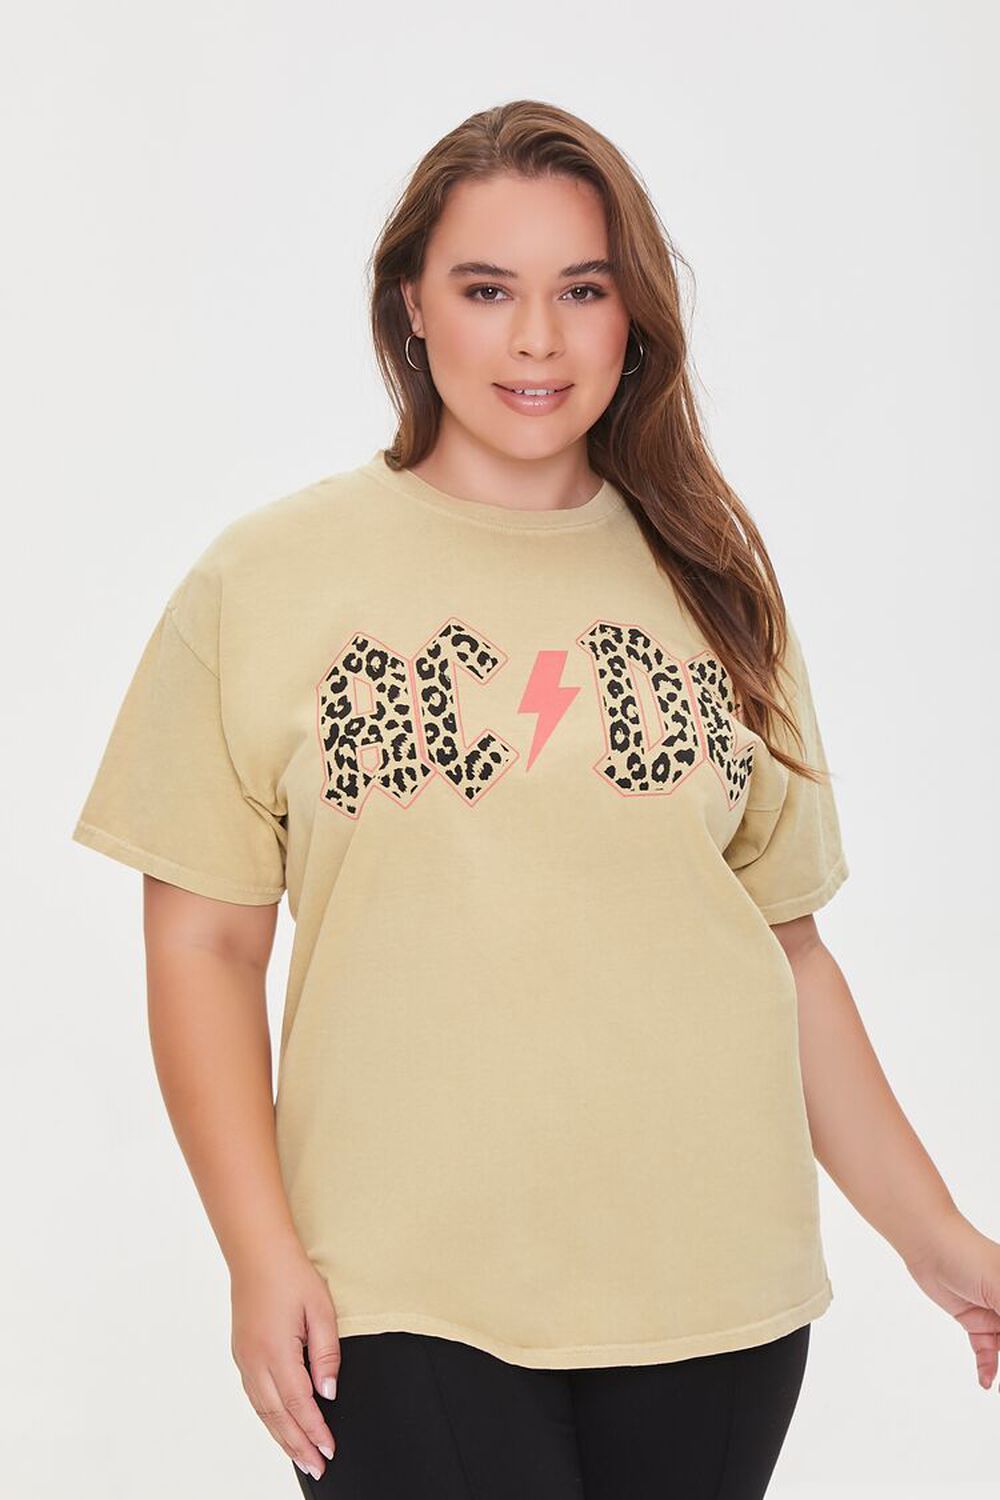 TAUPE/MULTI Plus Size ACDC Graphic Tee, image 1